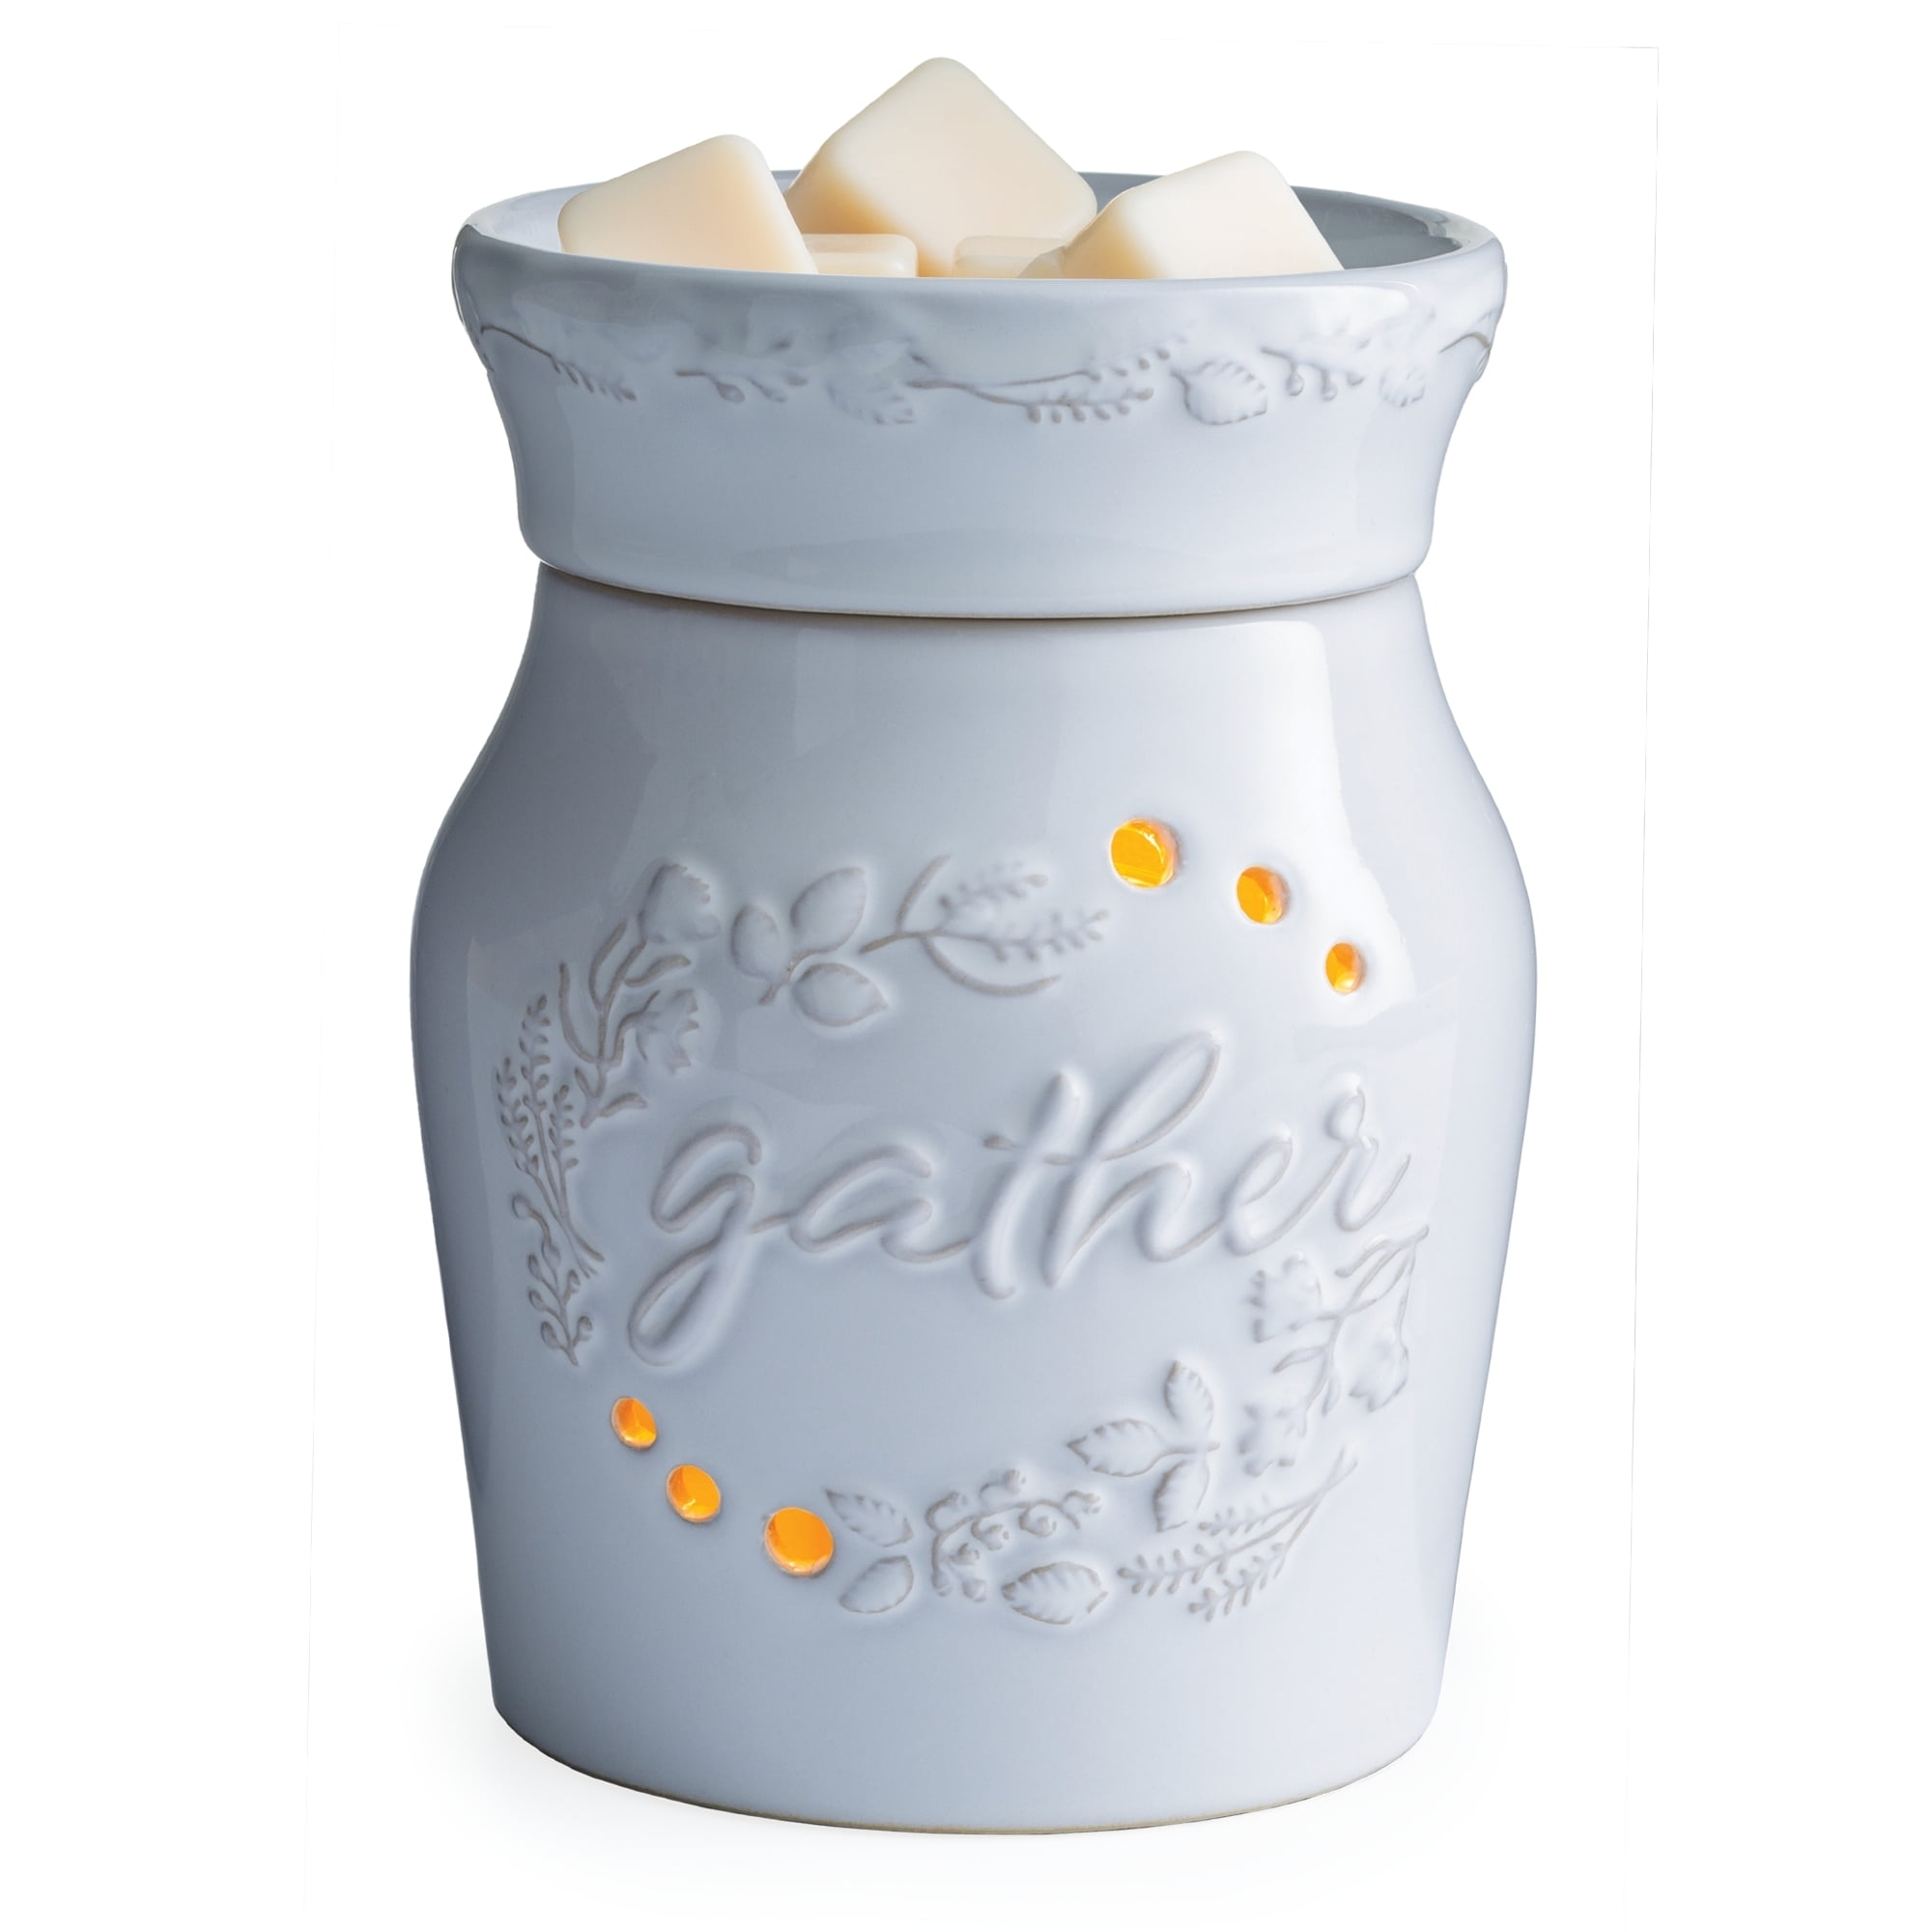 Illumination Fragrance Warmers by Candle Warmers Use w/Woodwick & Scentsy 